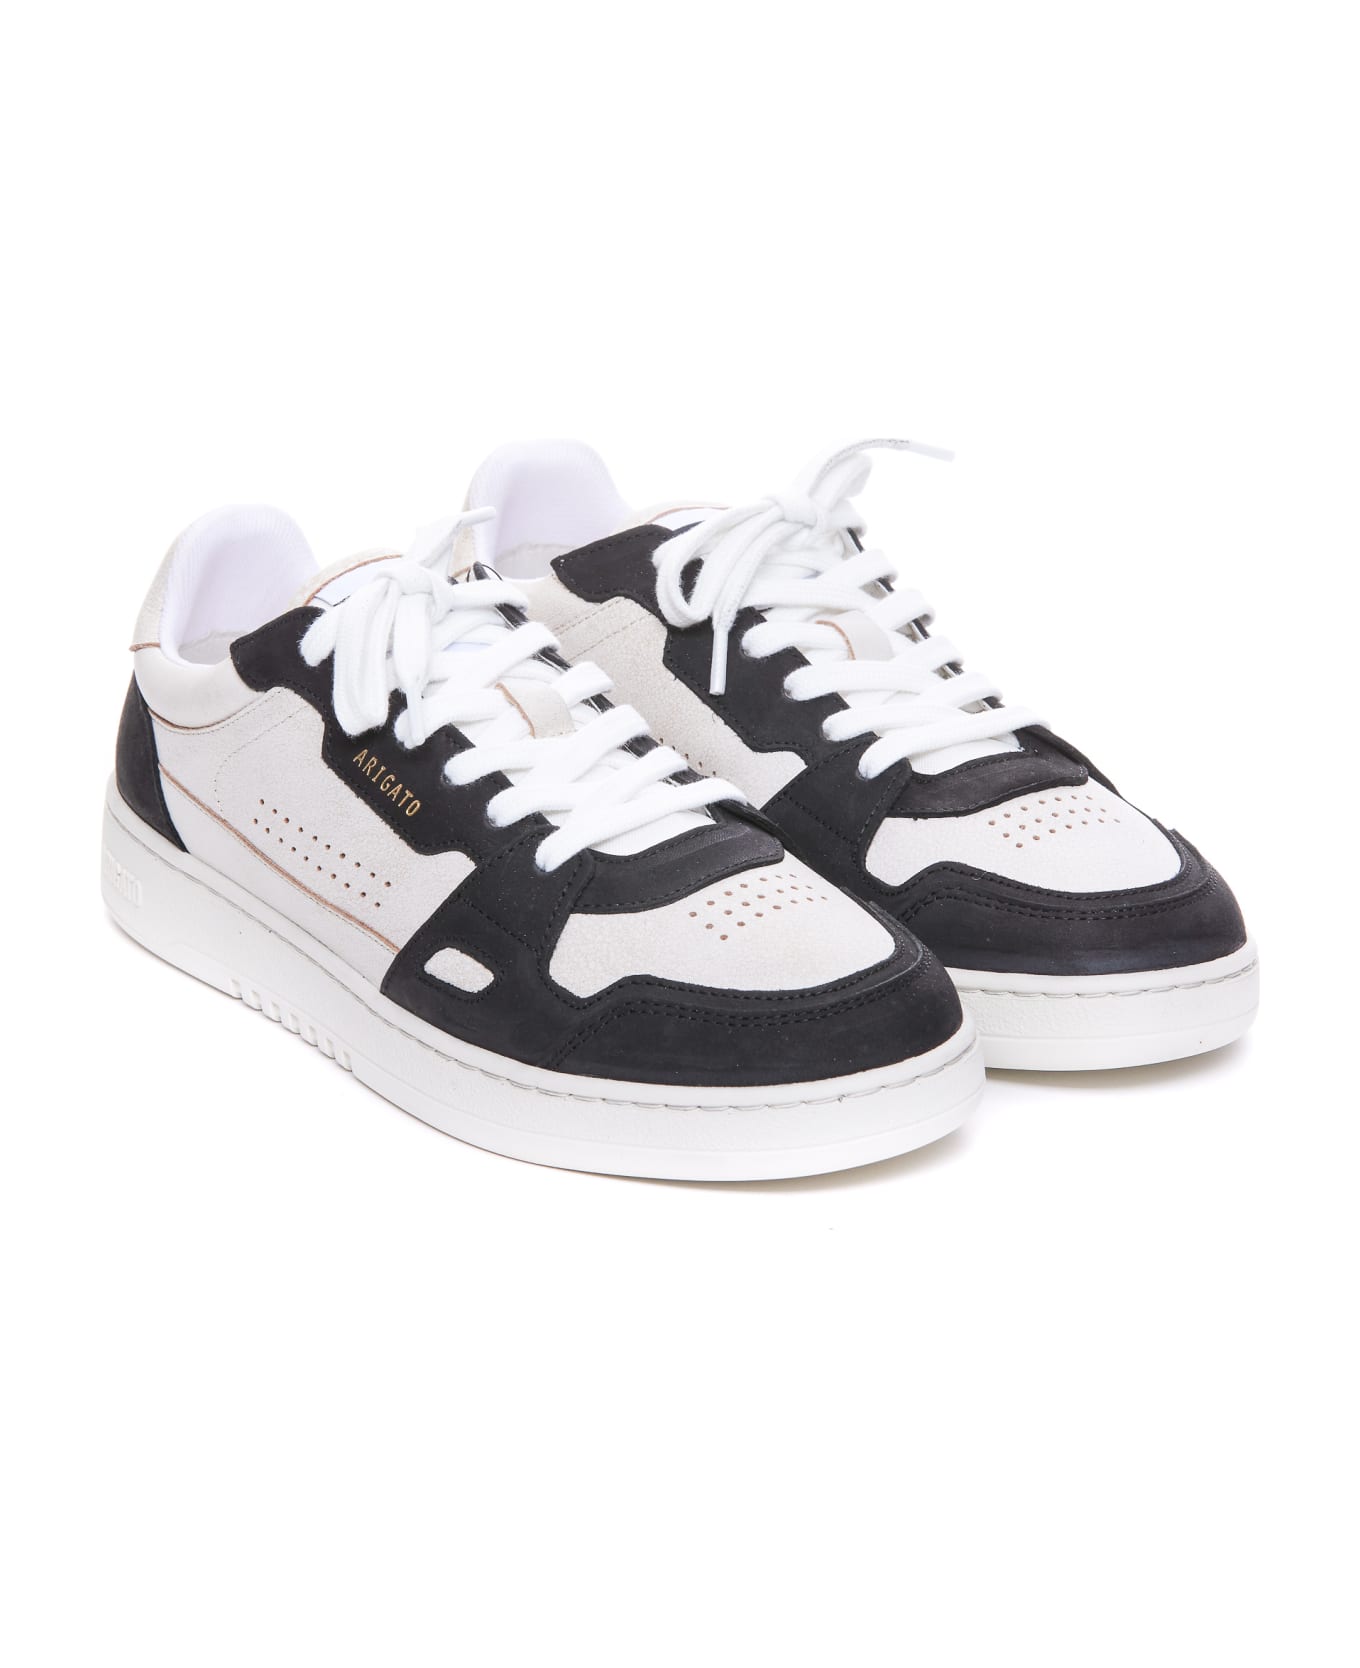 Axel Arigato Dice Lo Sneakers - Beige and black スニーカー